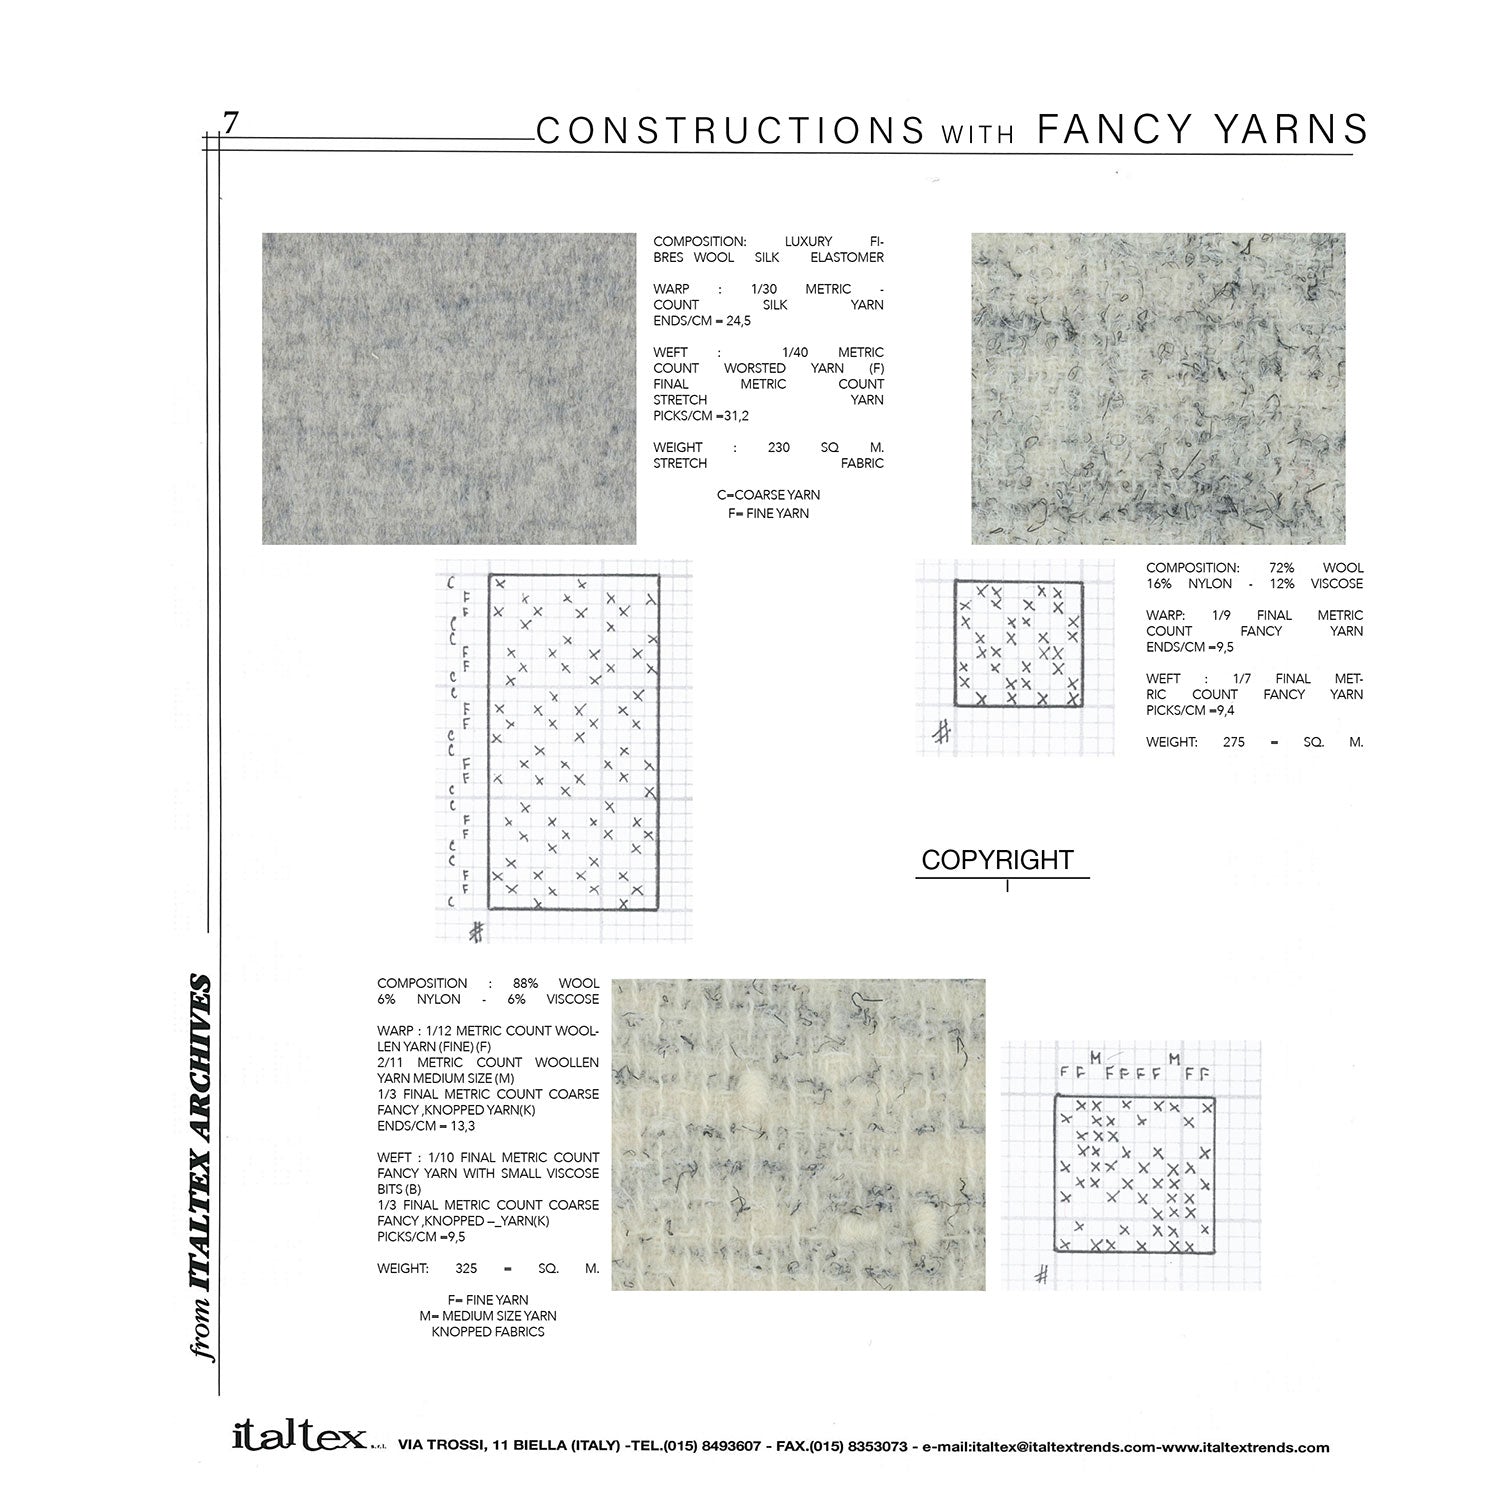 Constructions with fancy yarns